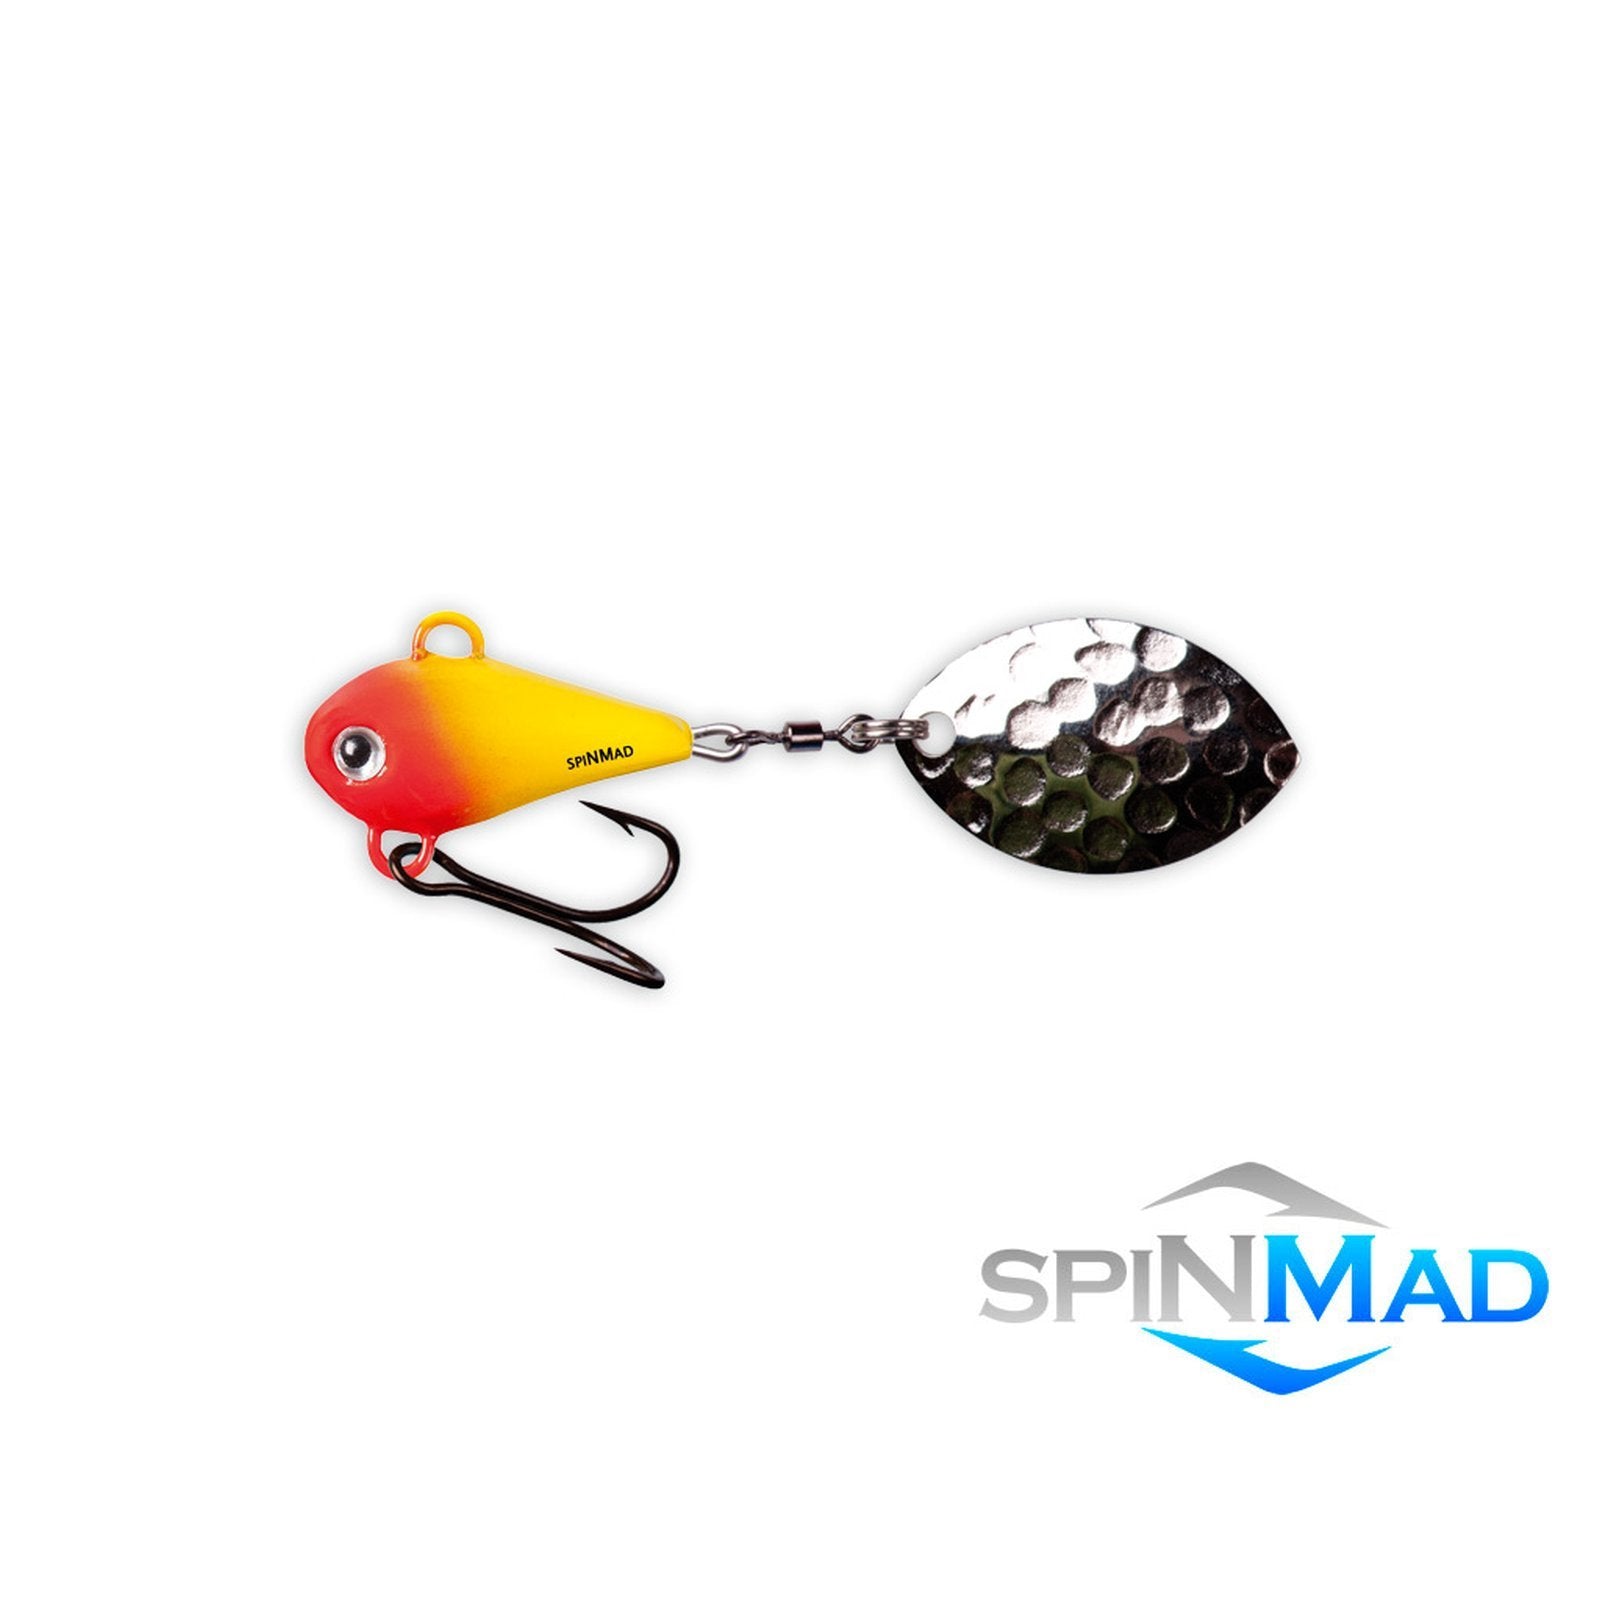 SpinMad MAG 6 0702